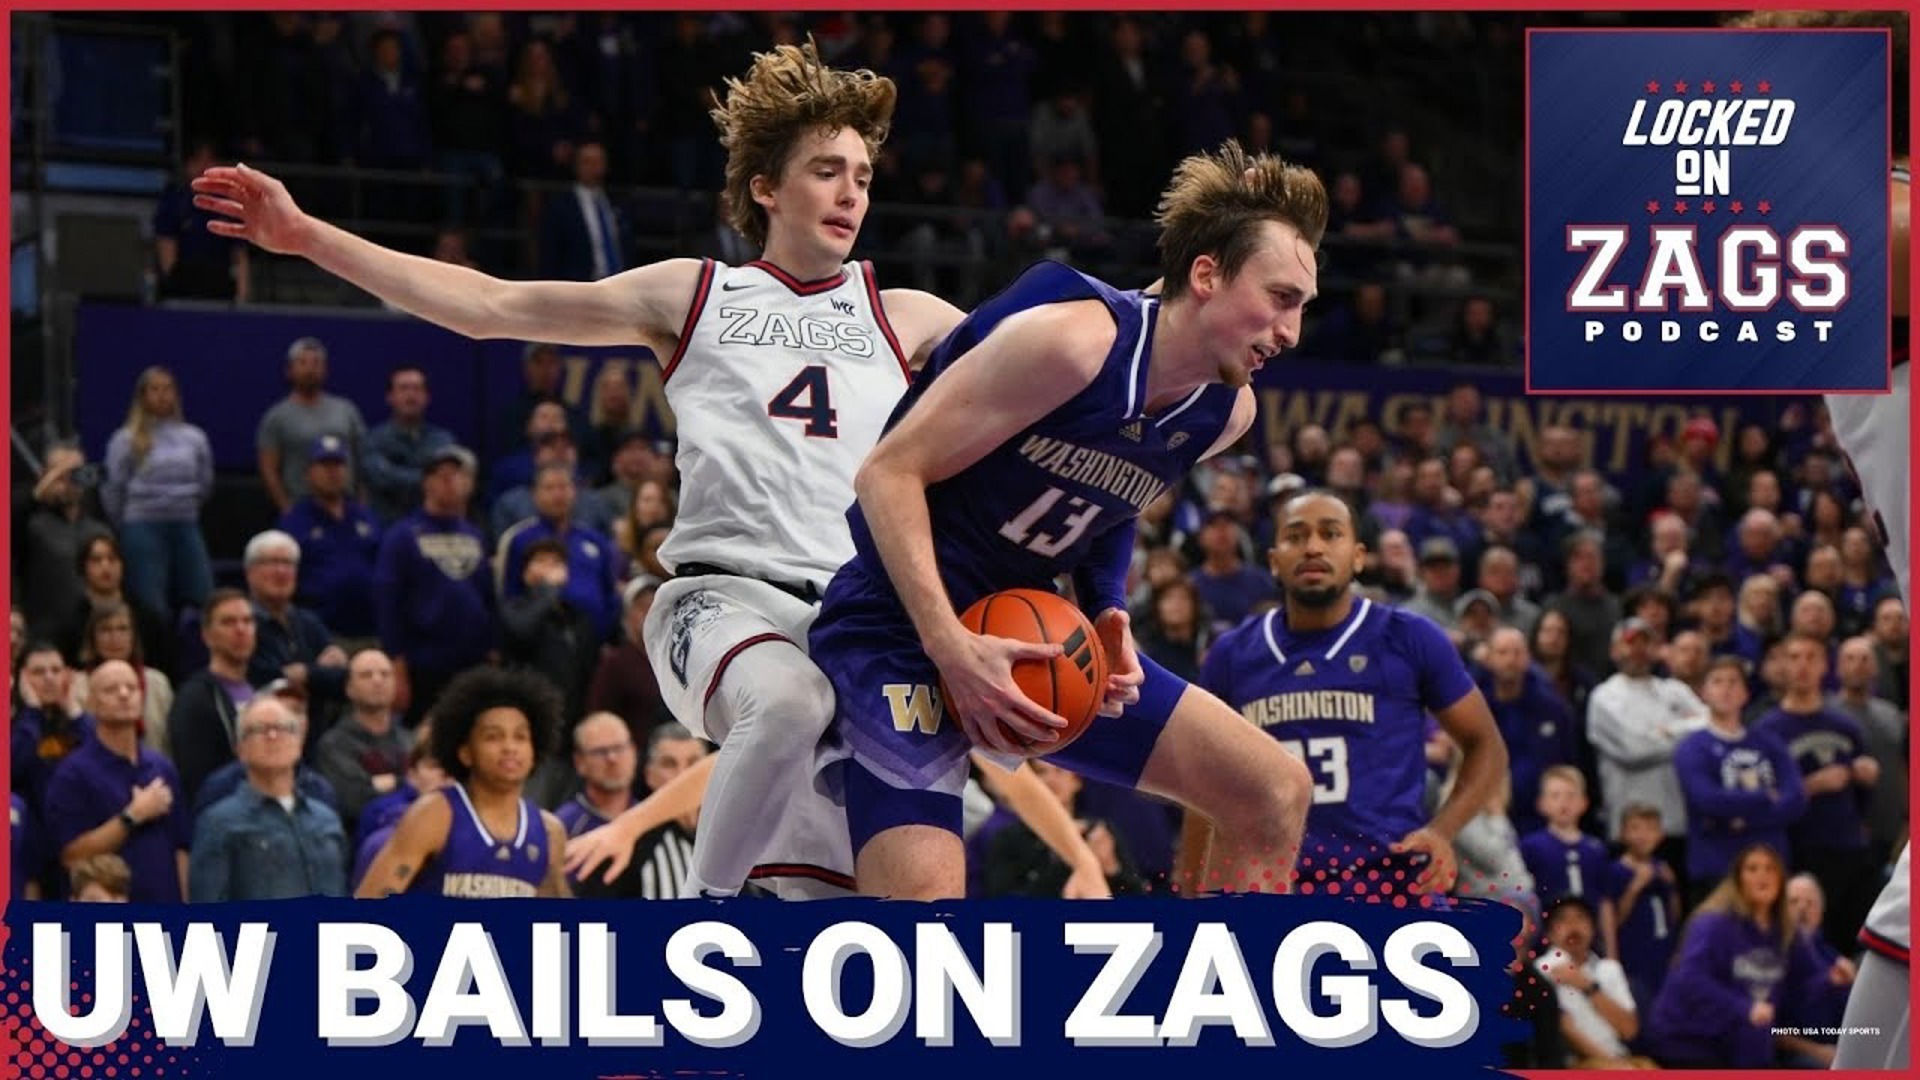 Mark Few and the Gonzaga Bulldogs were supposed to host the Washington Huskies and new head coach Danny Sprinkle at The Kennel in Spokane.